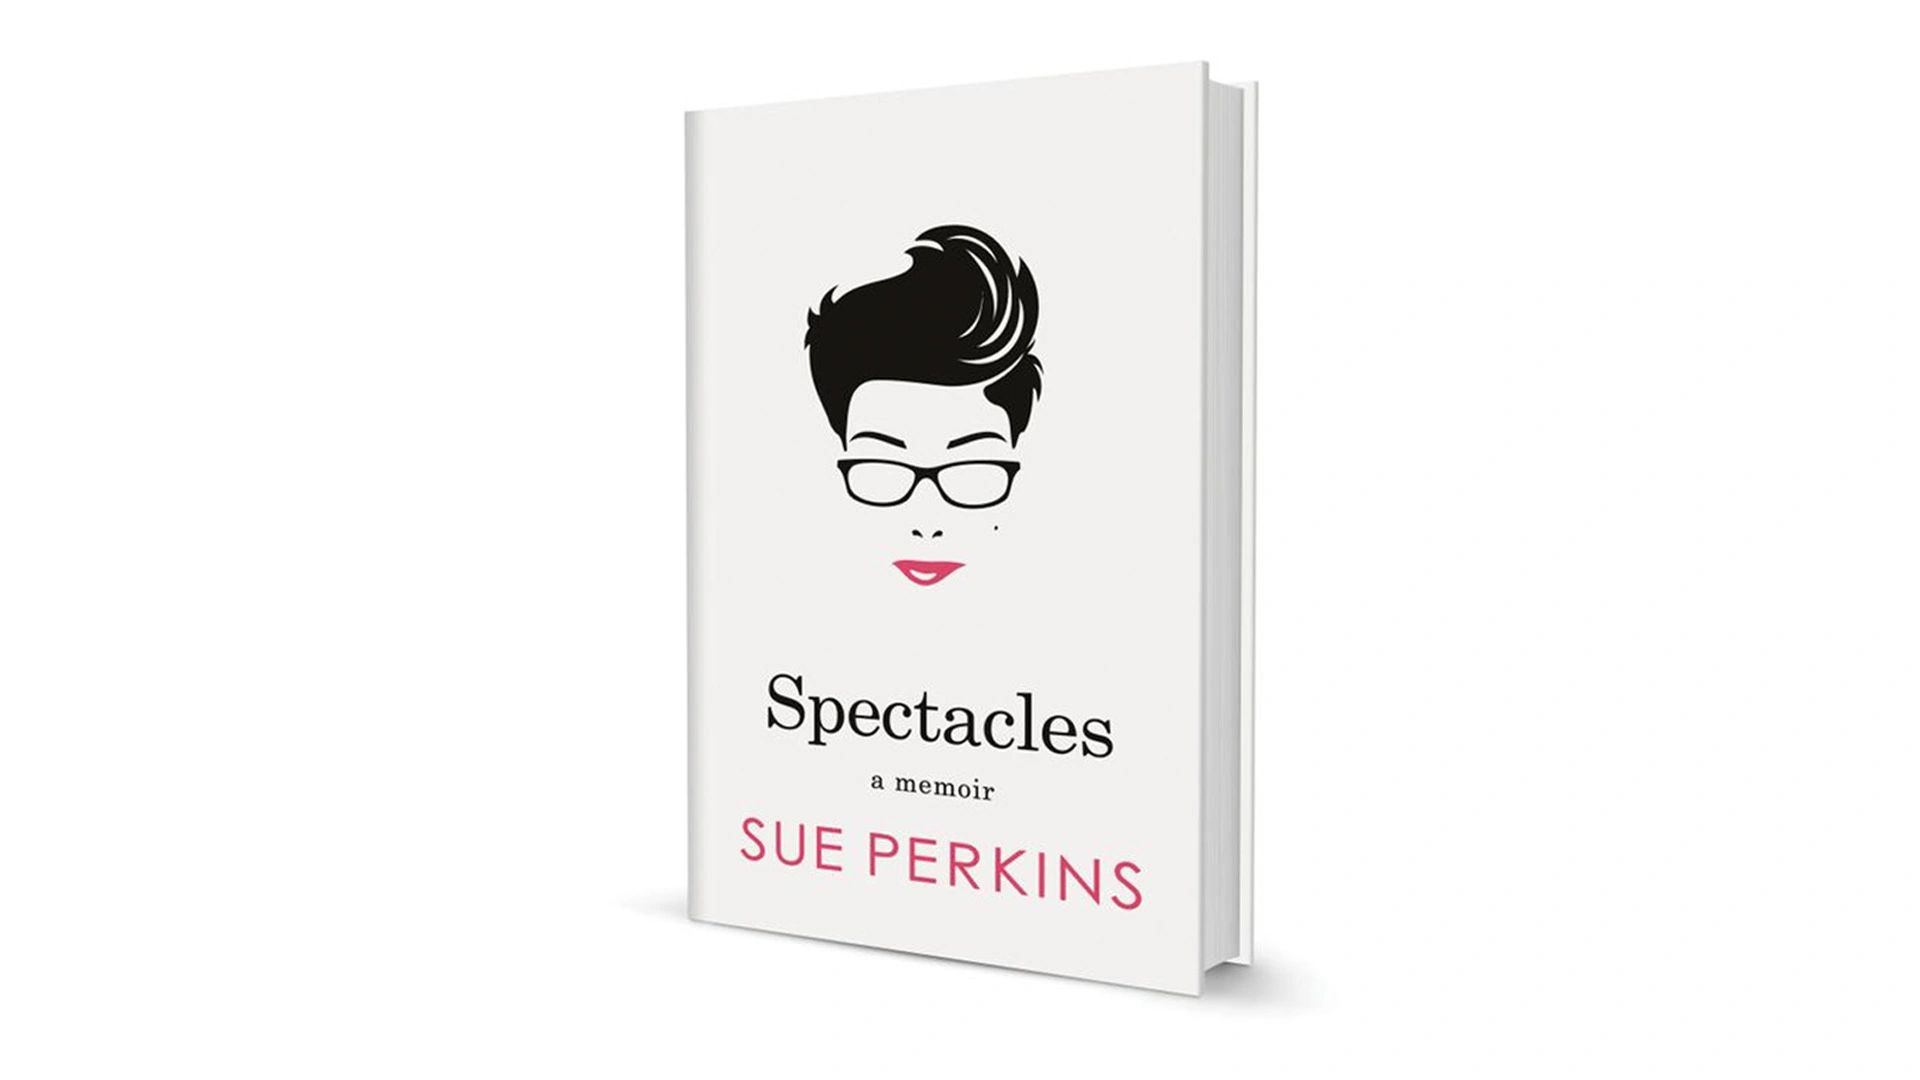 Book jacket design and illustration.
Spectacles. A Memoir by Sue Perkins. Penguin Books.